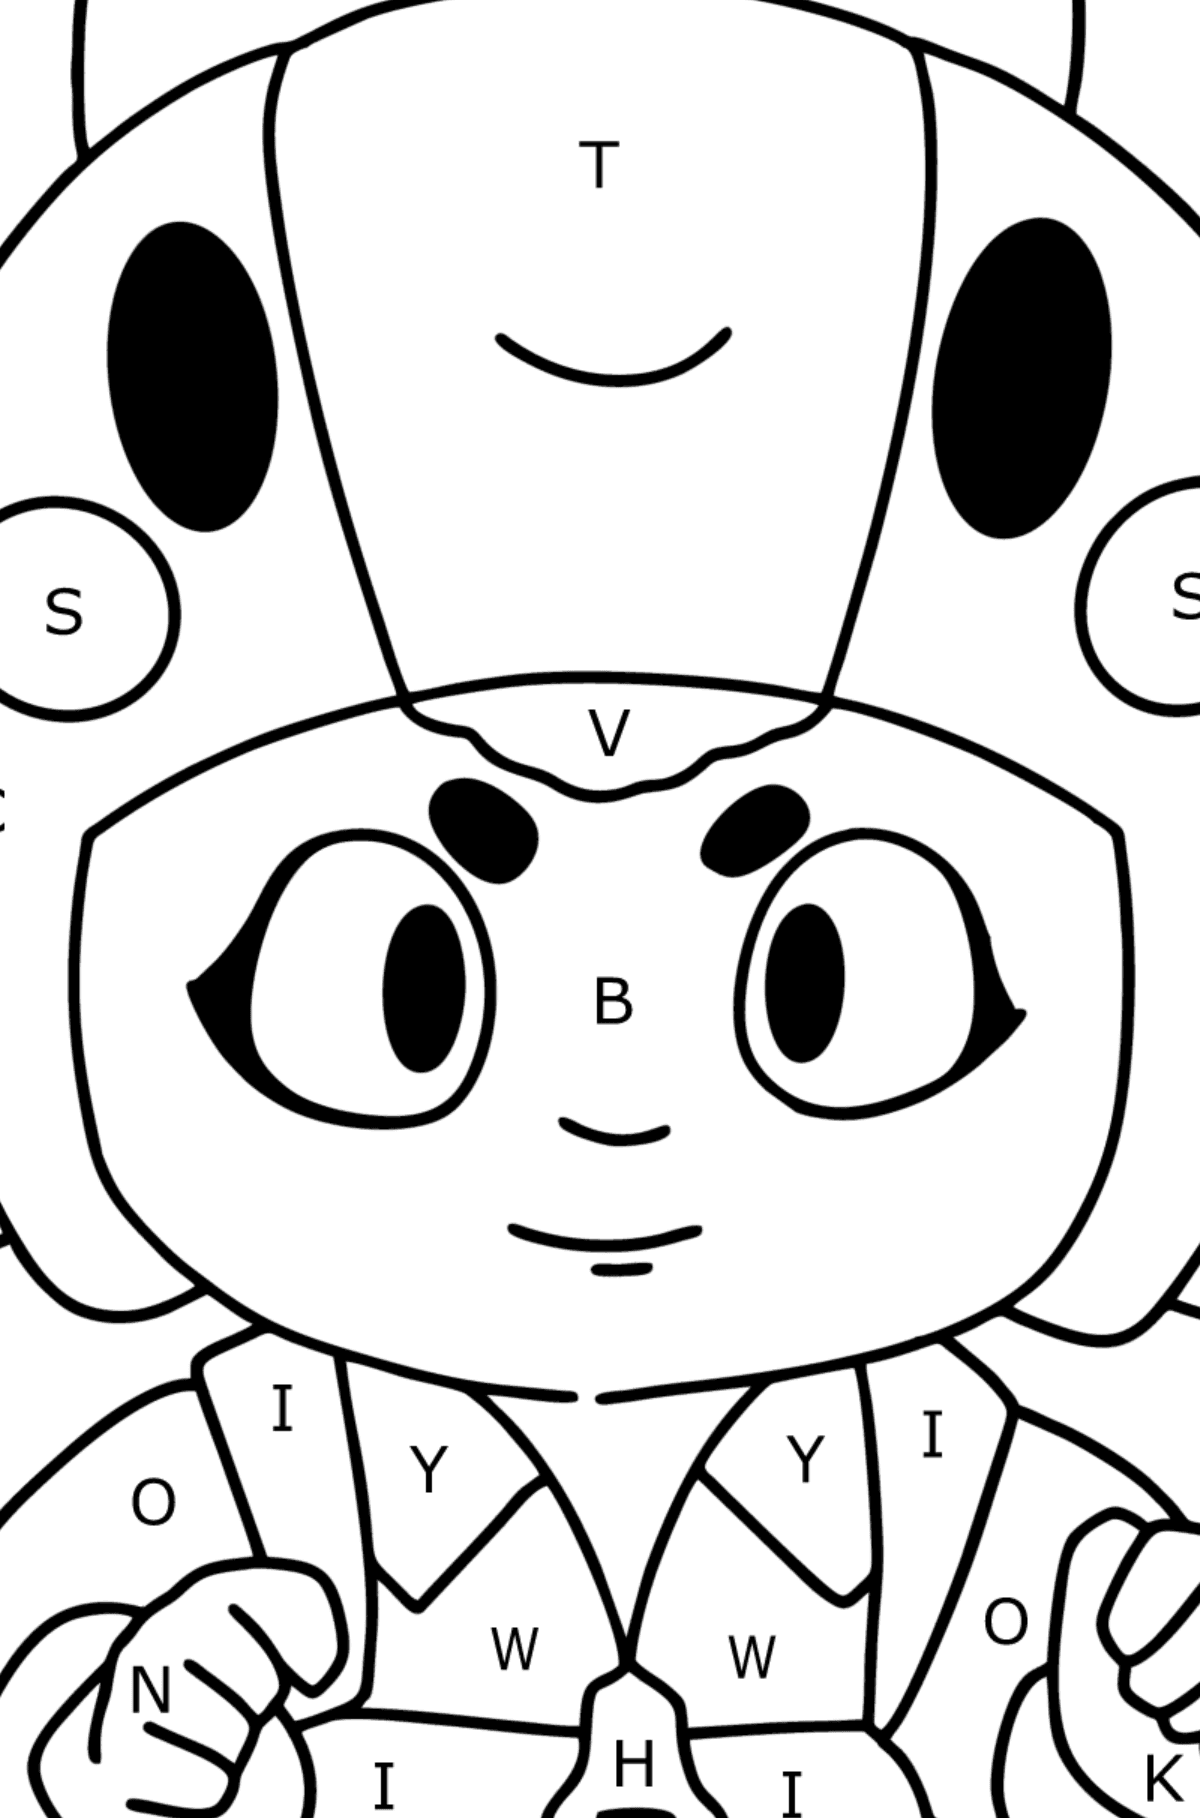 Brawl Stars Bea coloring page - Coloring by Letters for Kids